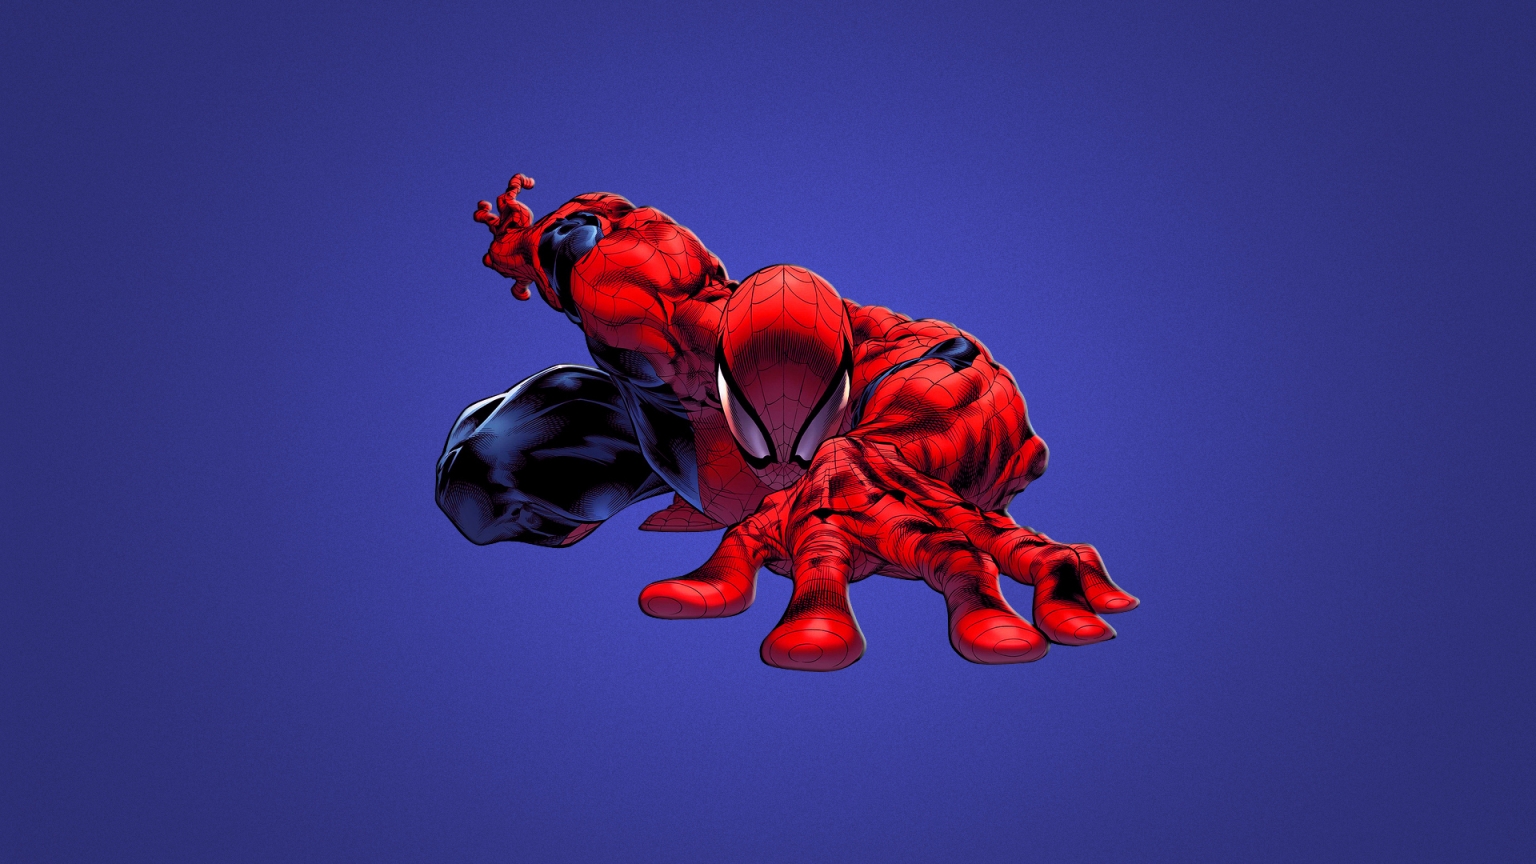 Cool Spiderman for 1536 x 864 HDTV resolution